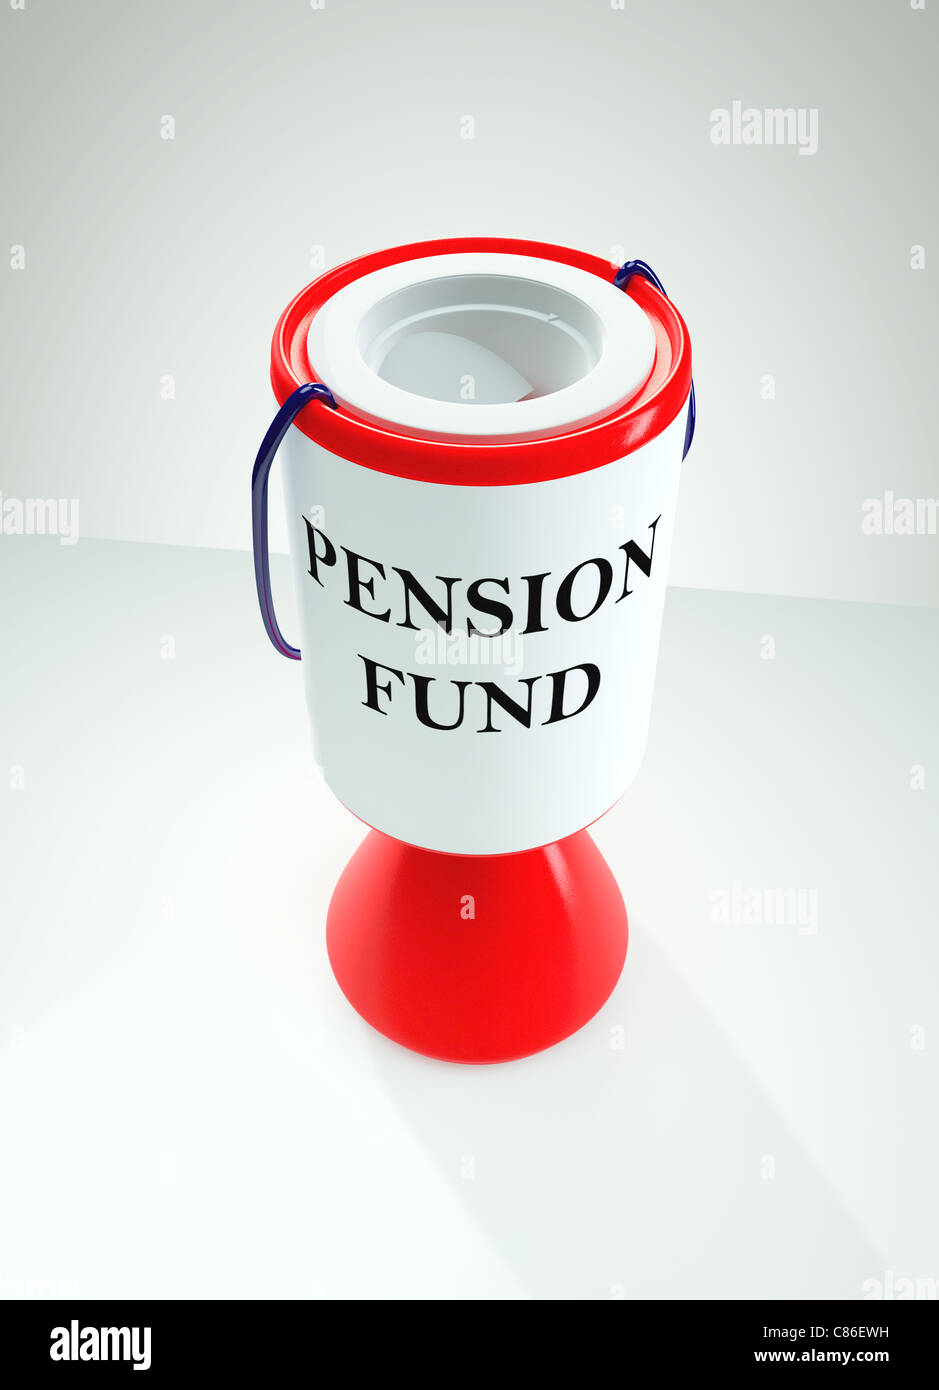 Pension Fund text on label of plastic Charity Collection box. Stock Photo